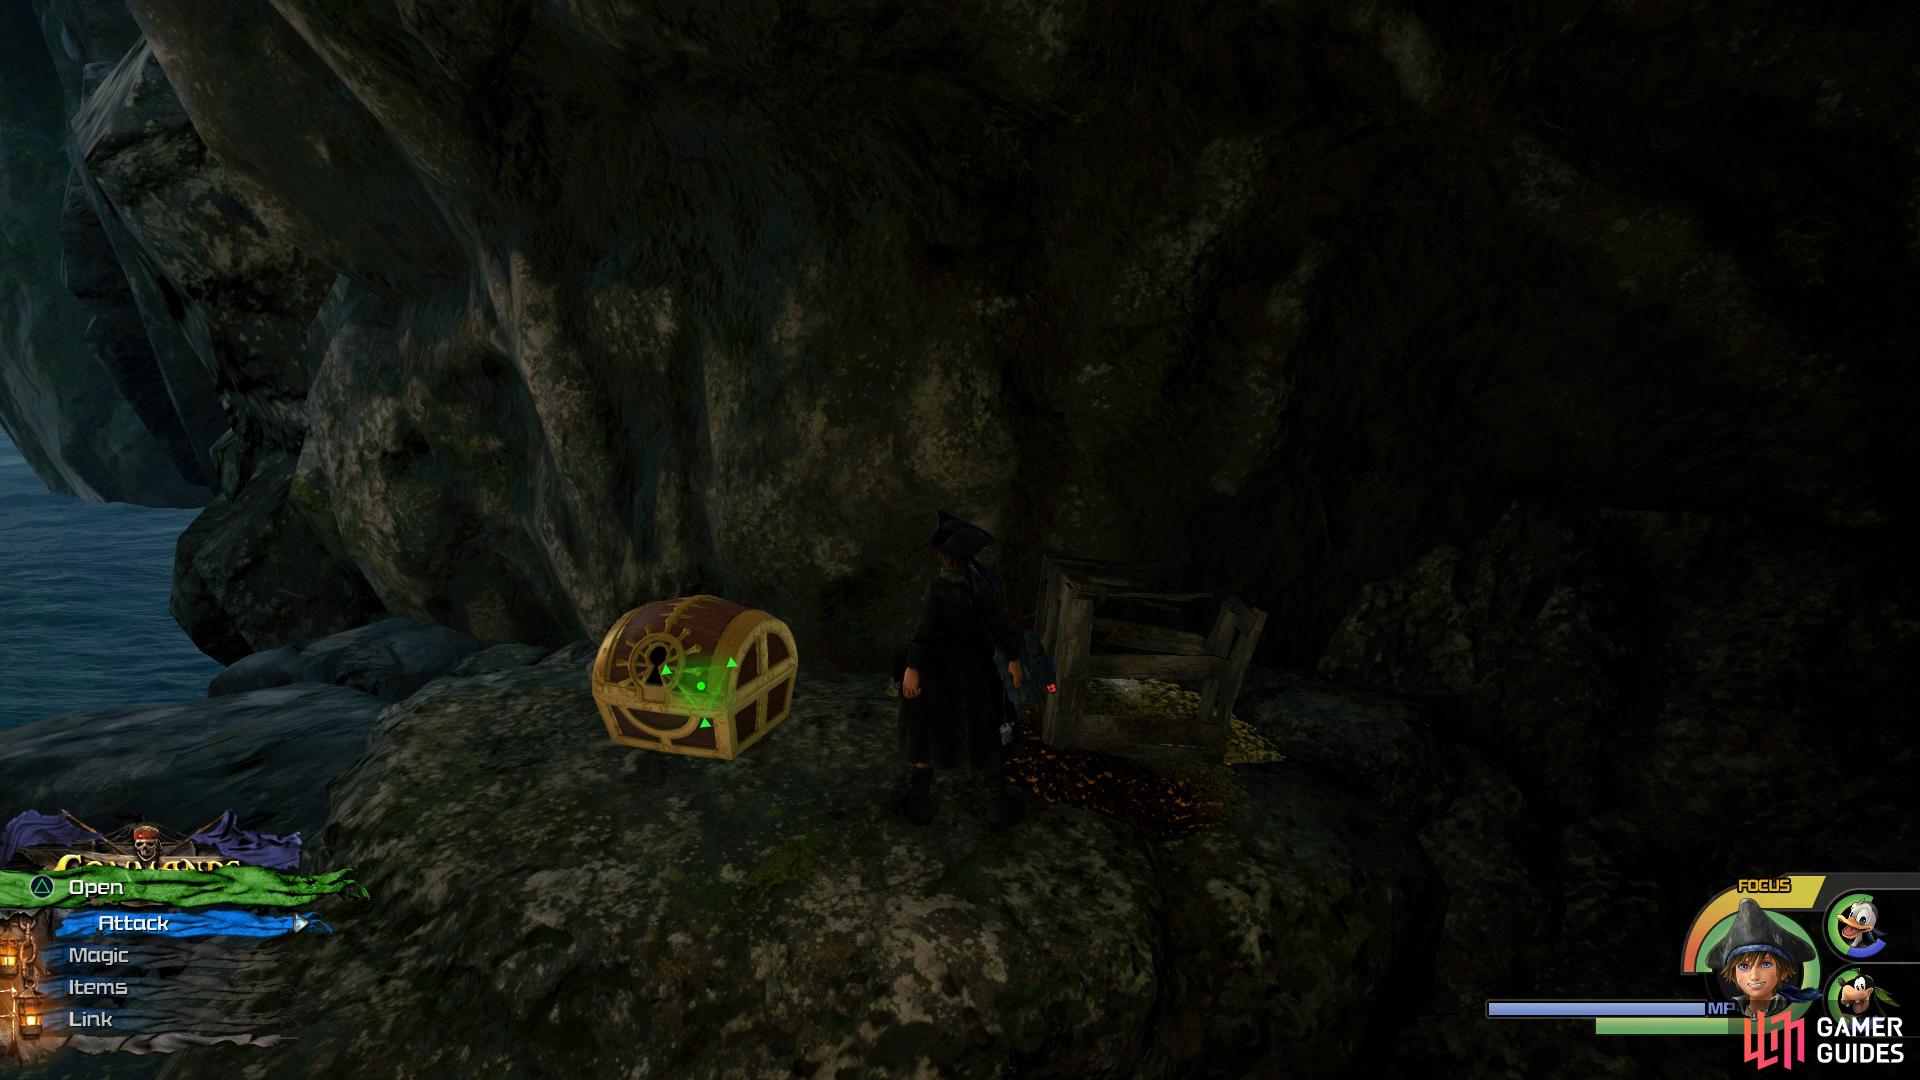 Head to the end of the cave to find this chest.